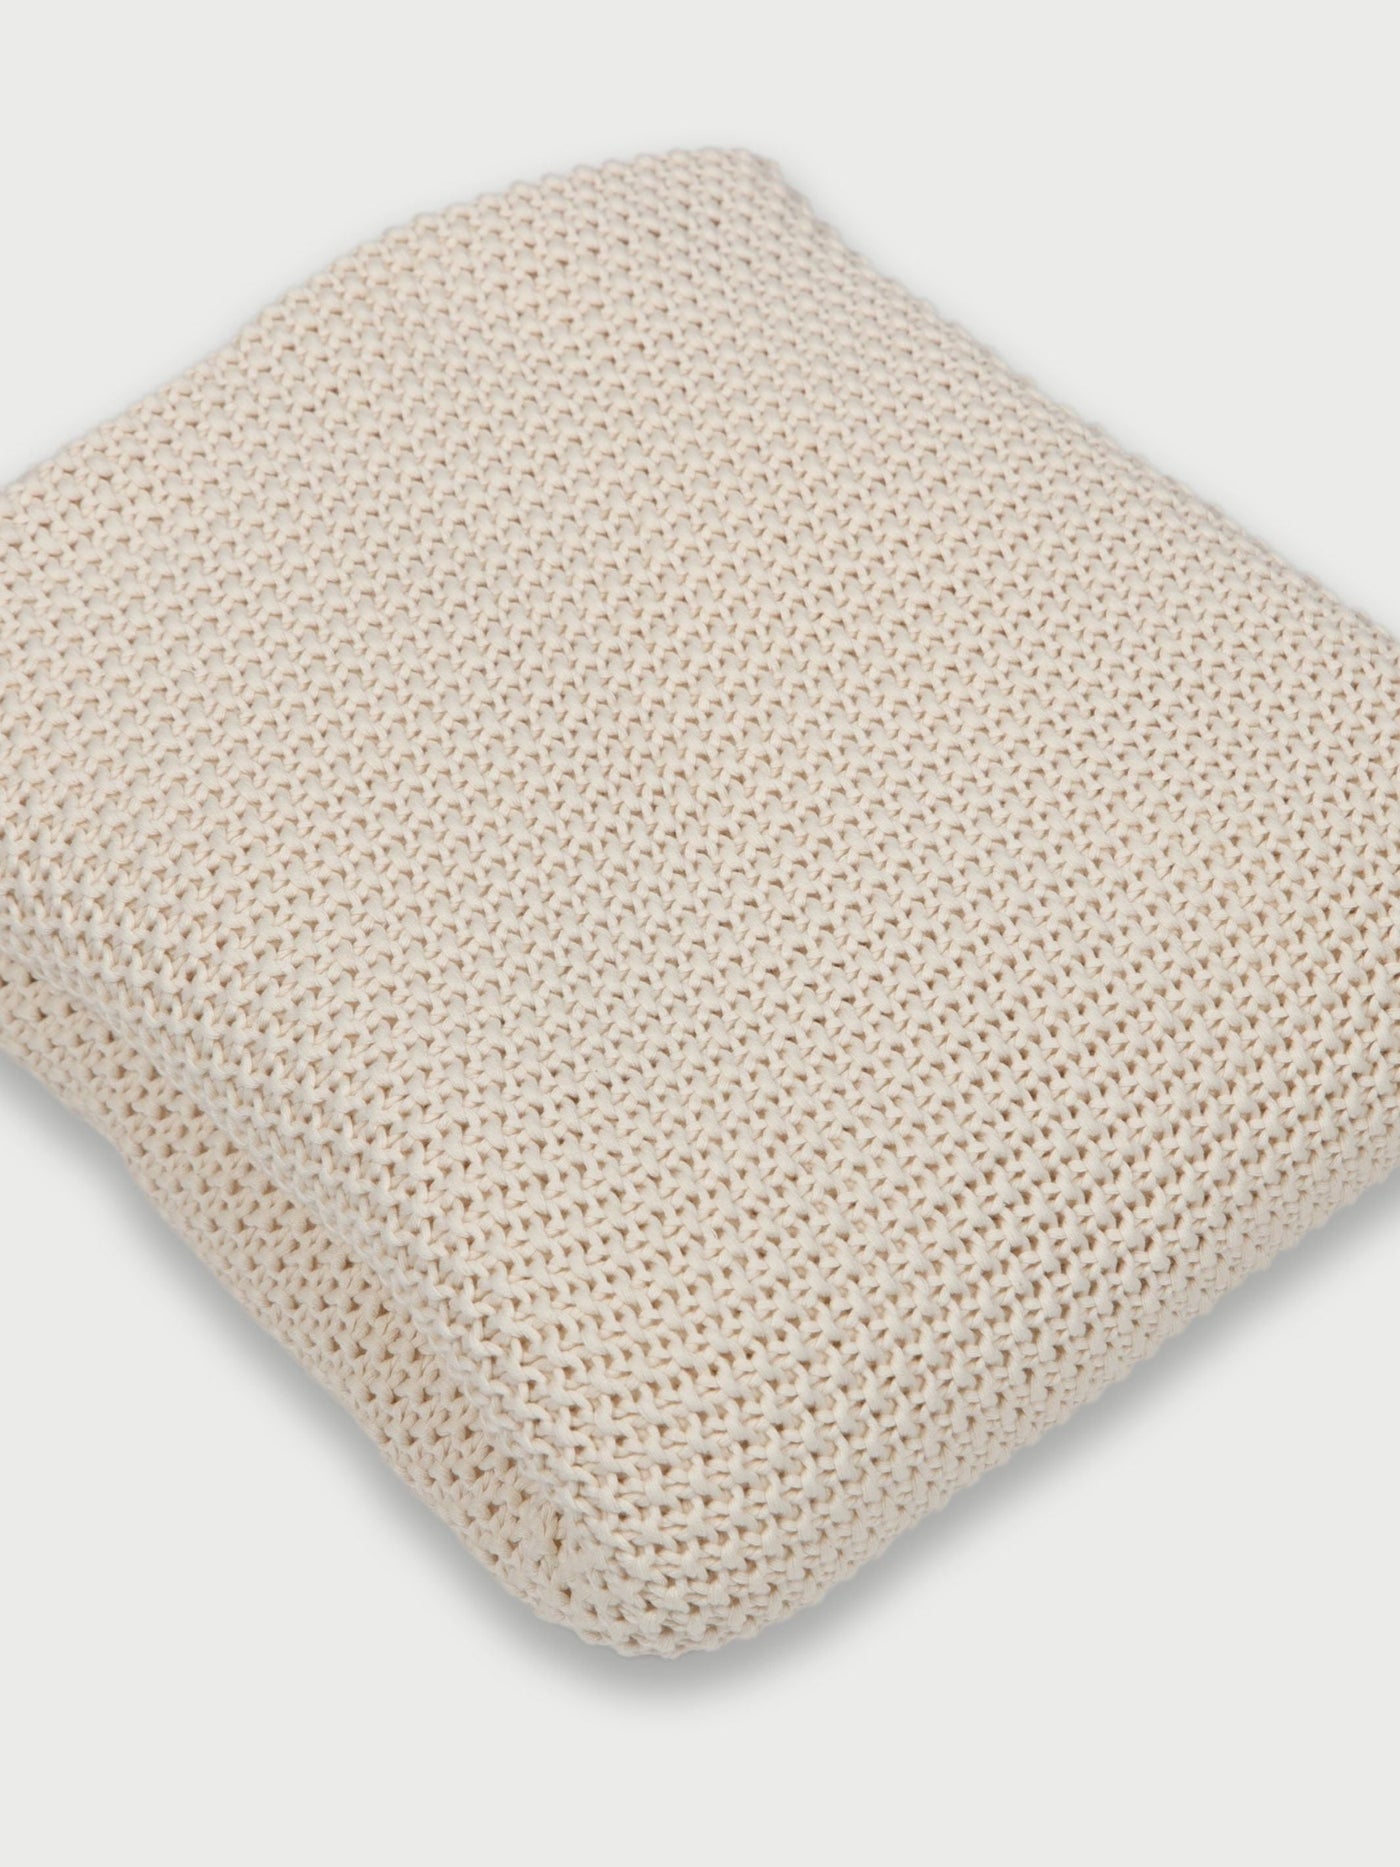 Knit Throw - Ivory Moss